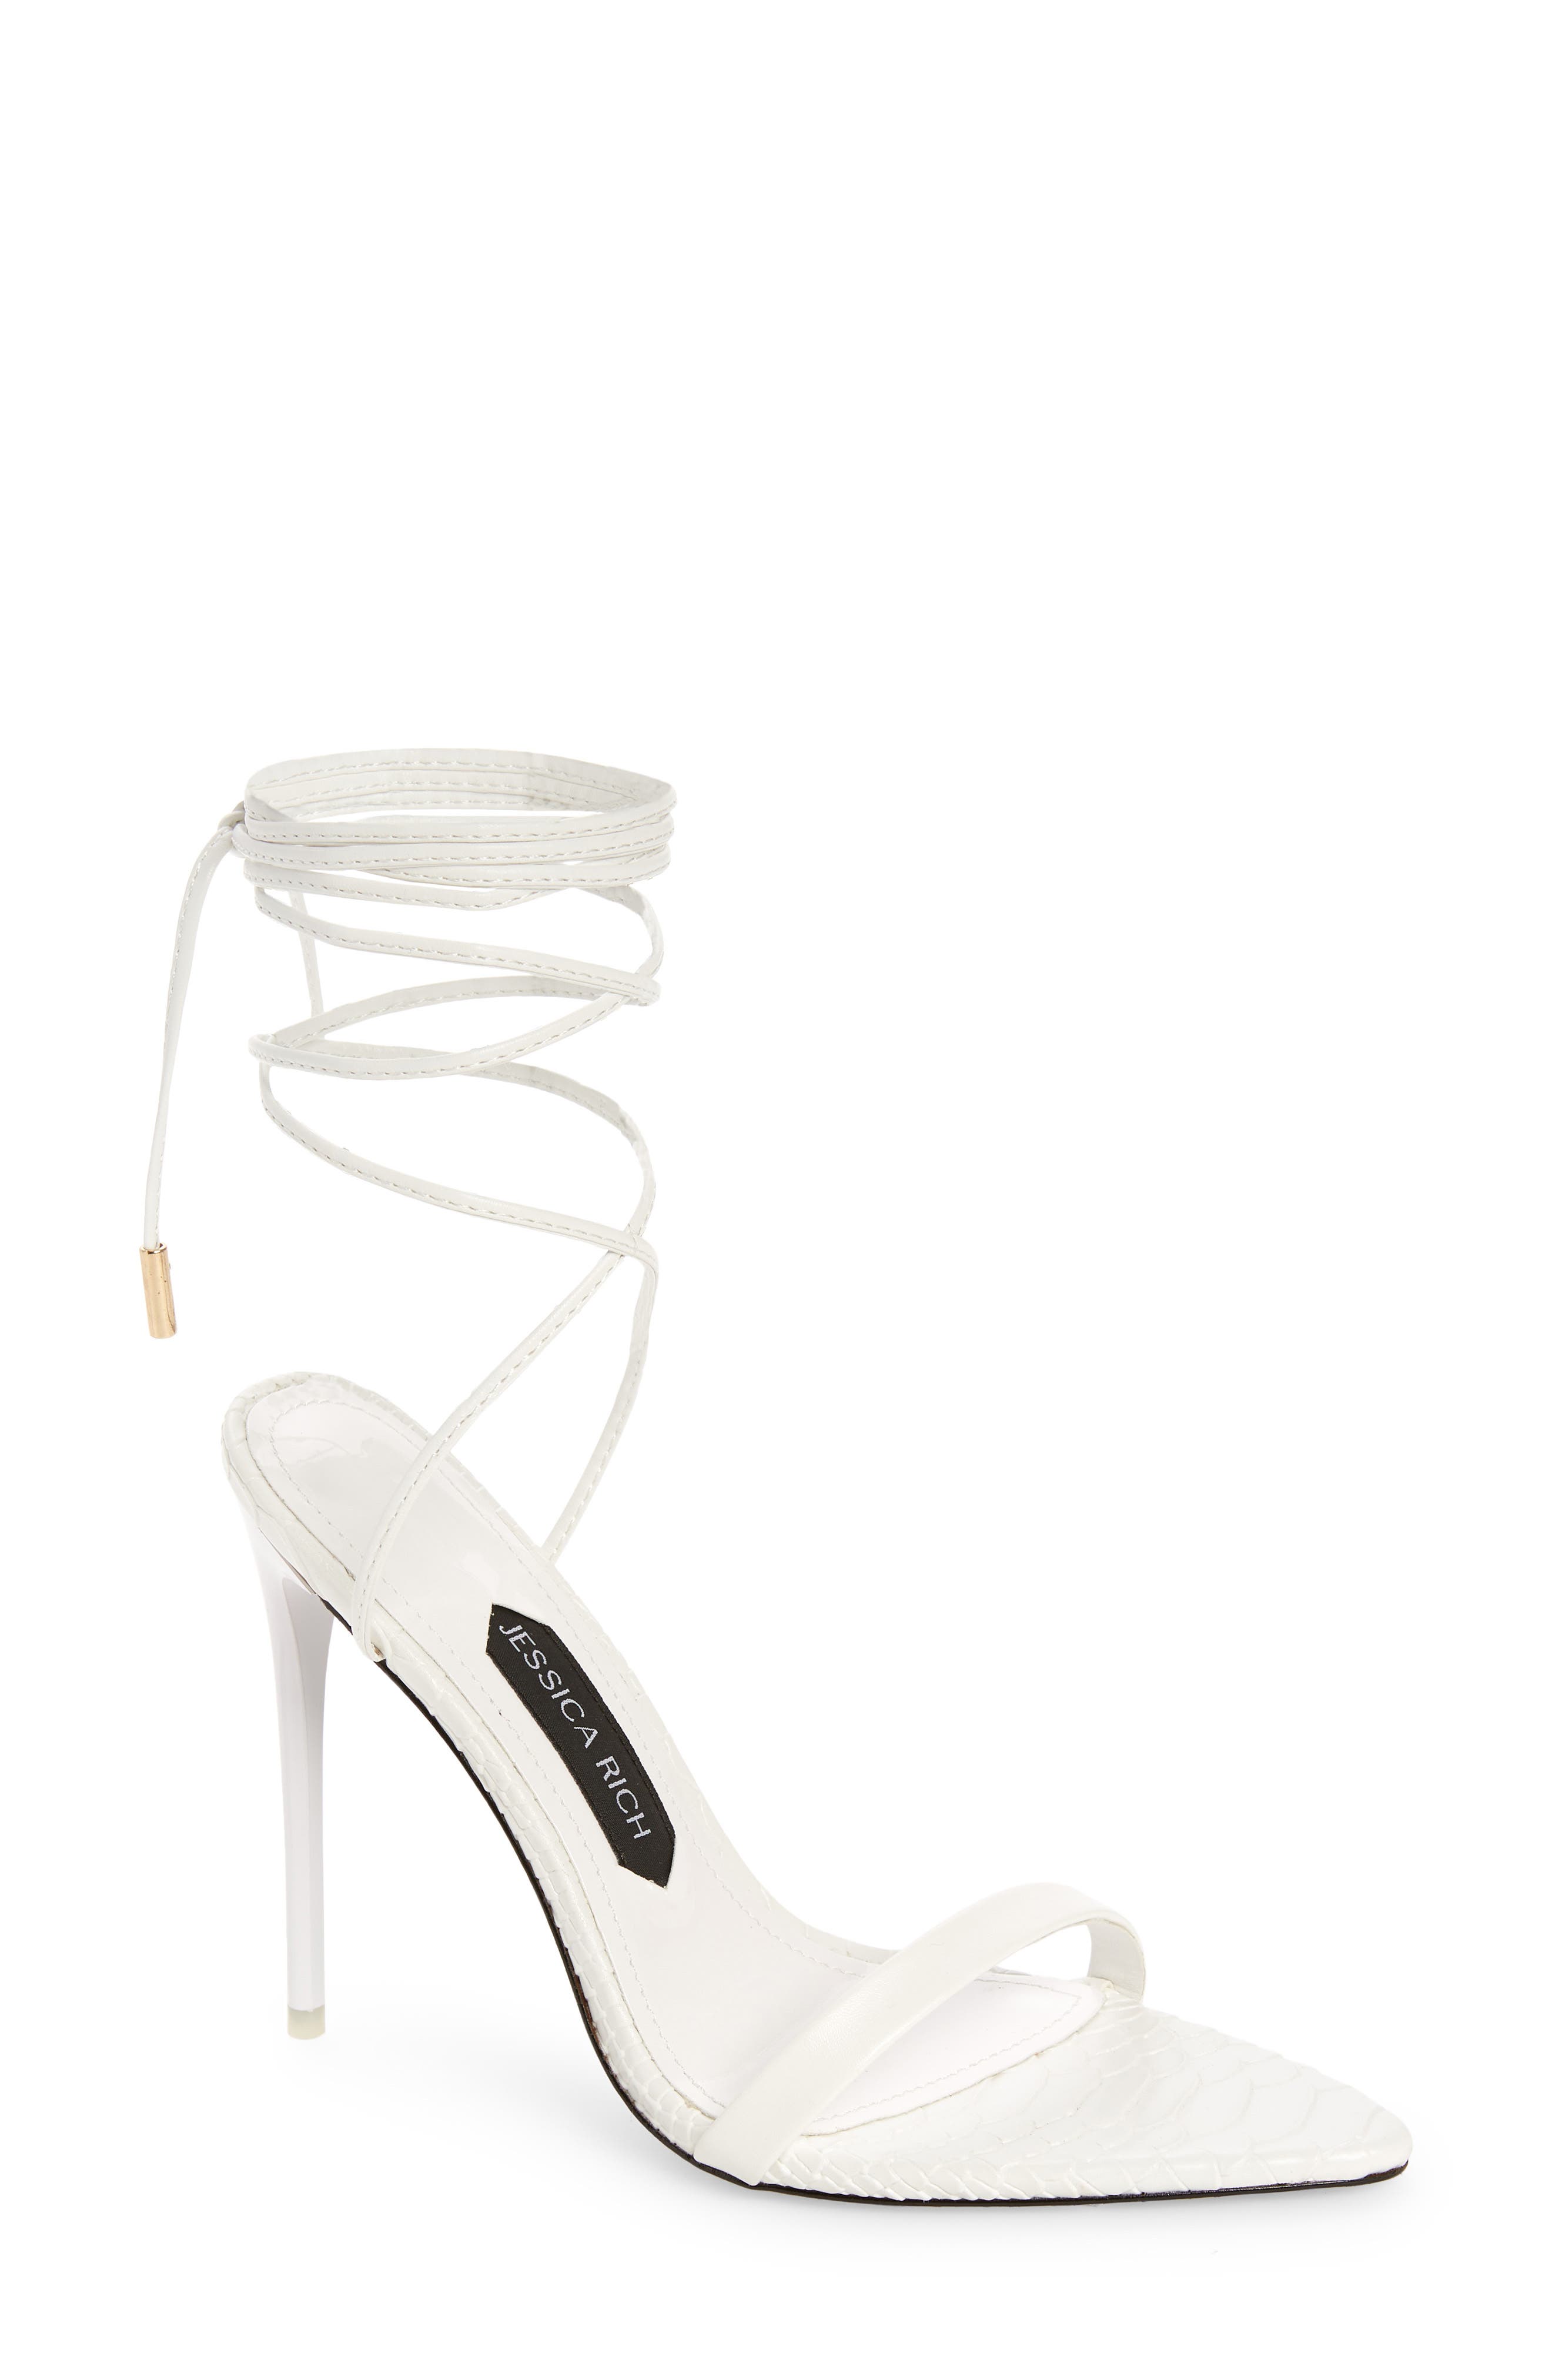 JESSICA RICH Ankle Strap Sandal in White